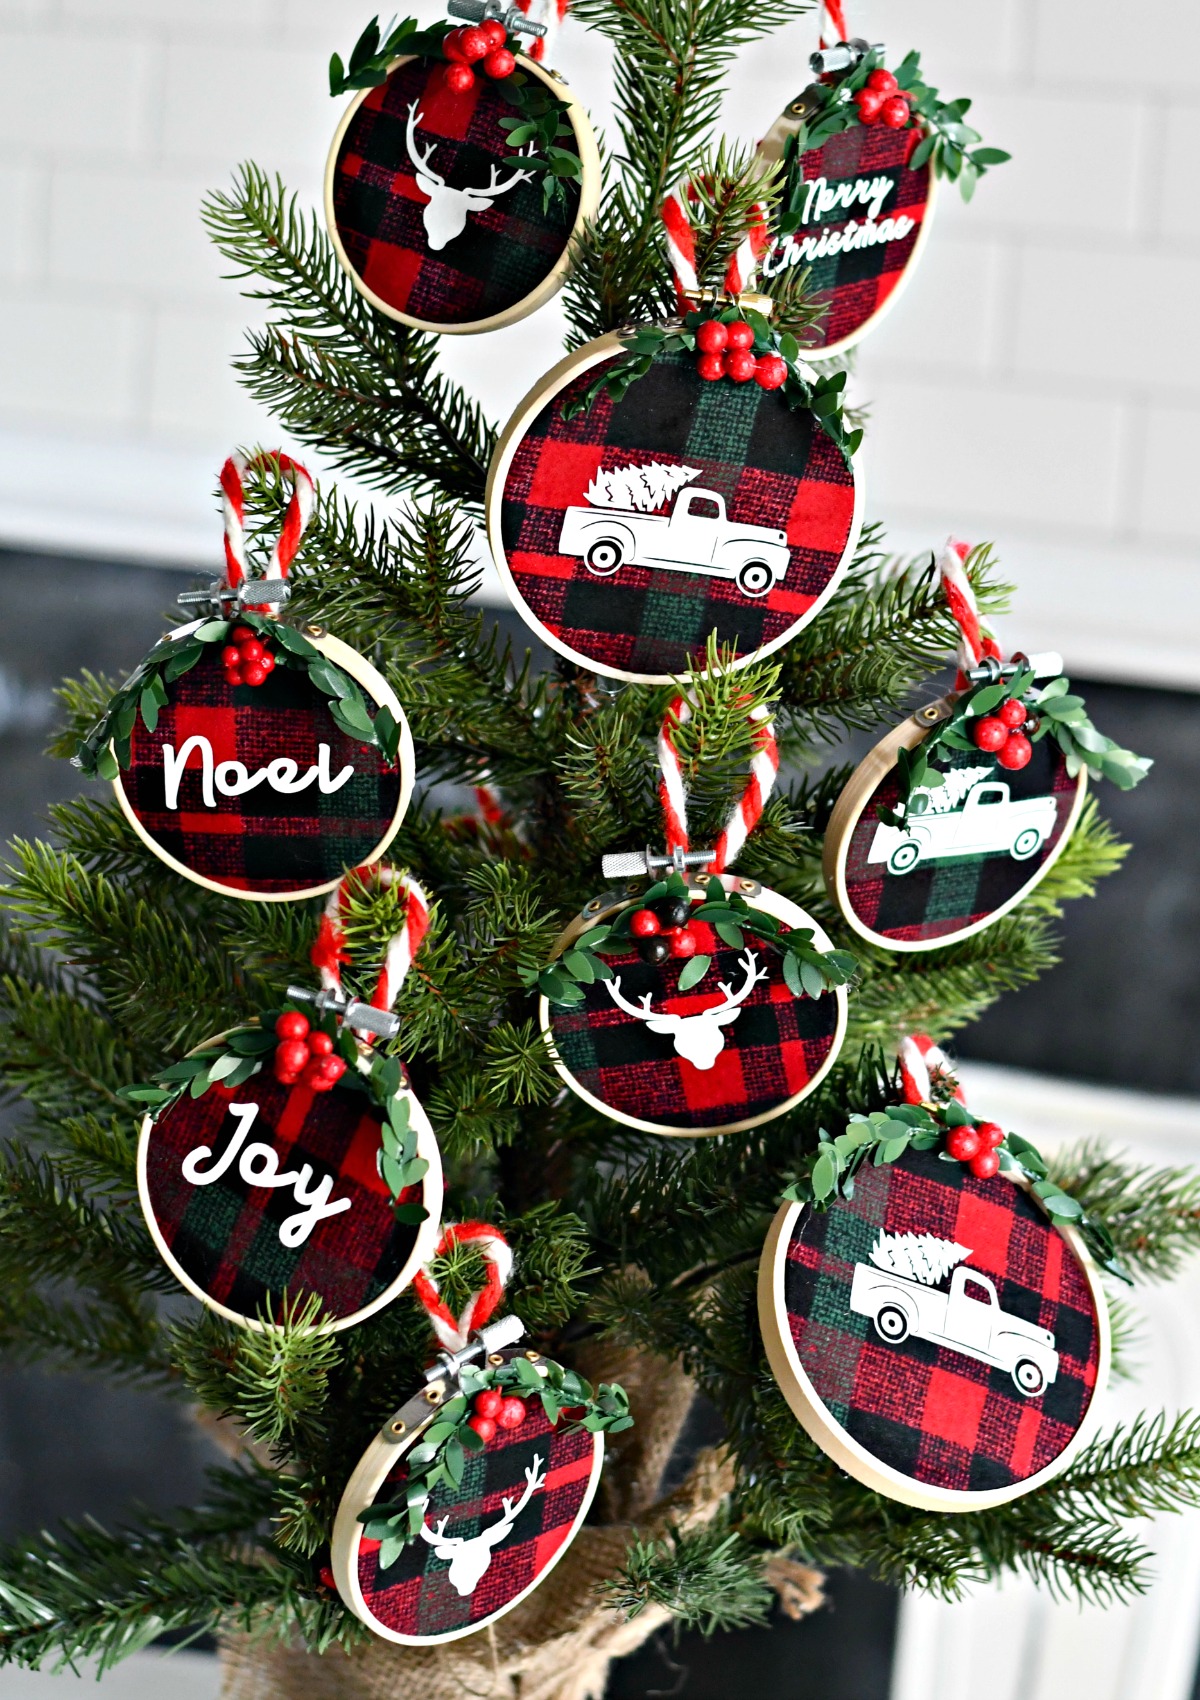 DIY Embroidery Hoop Christmas Ornaments – a small tree decorated with the ornaments